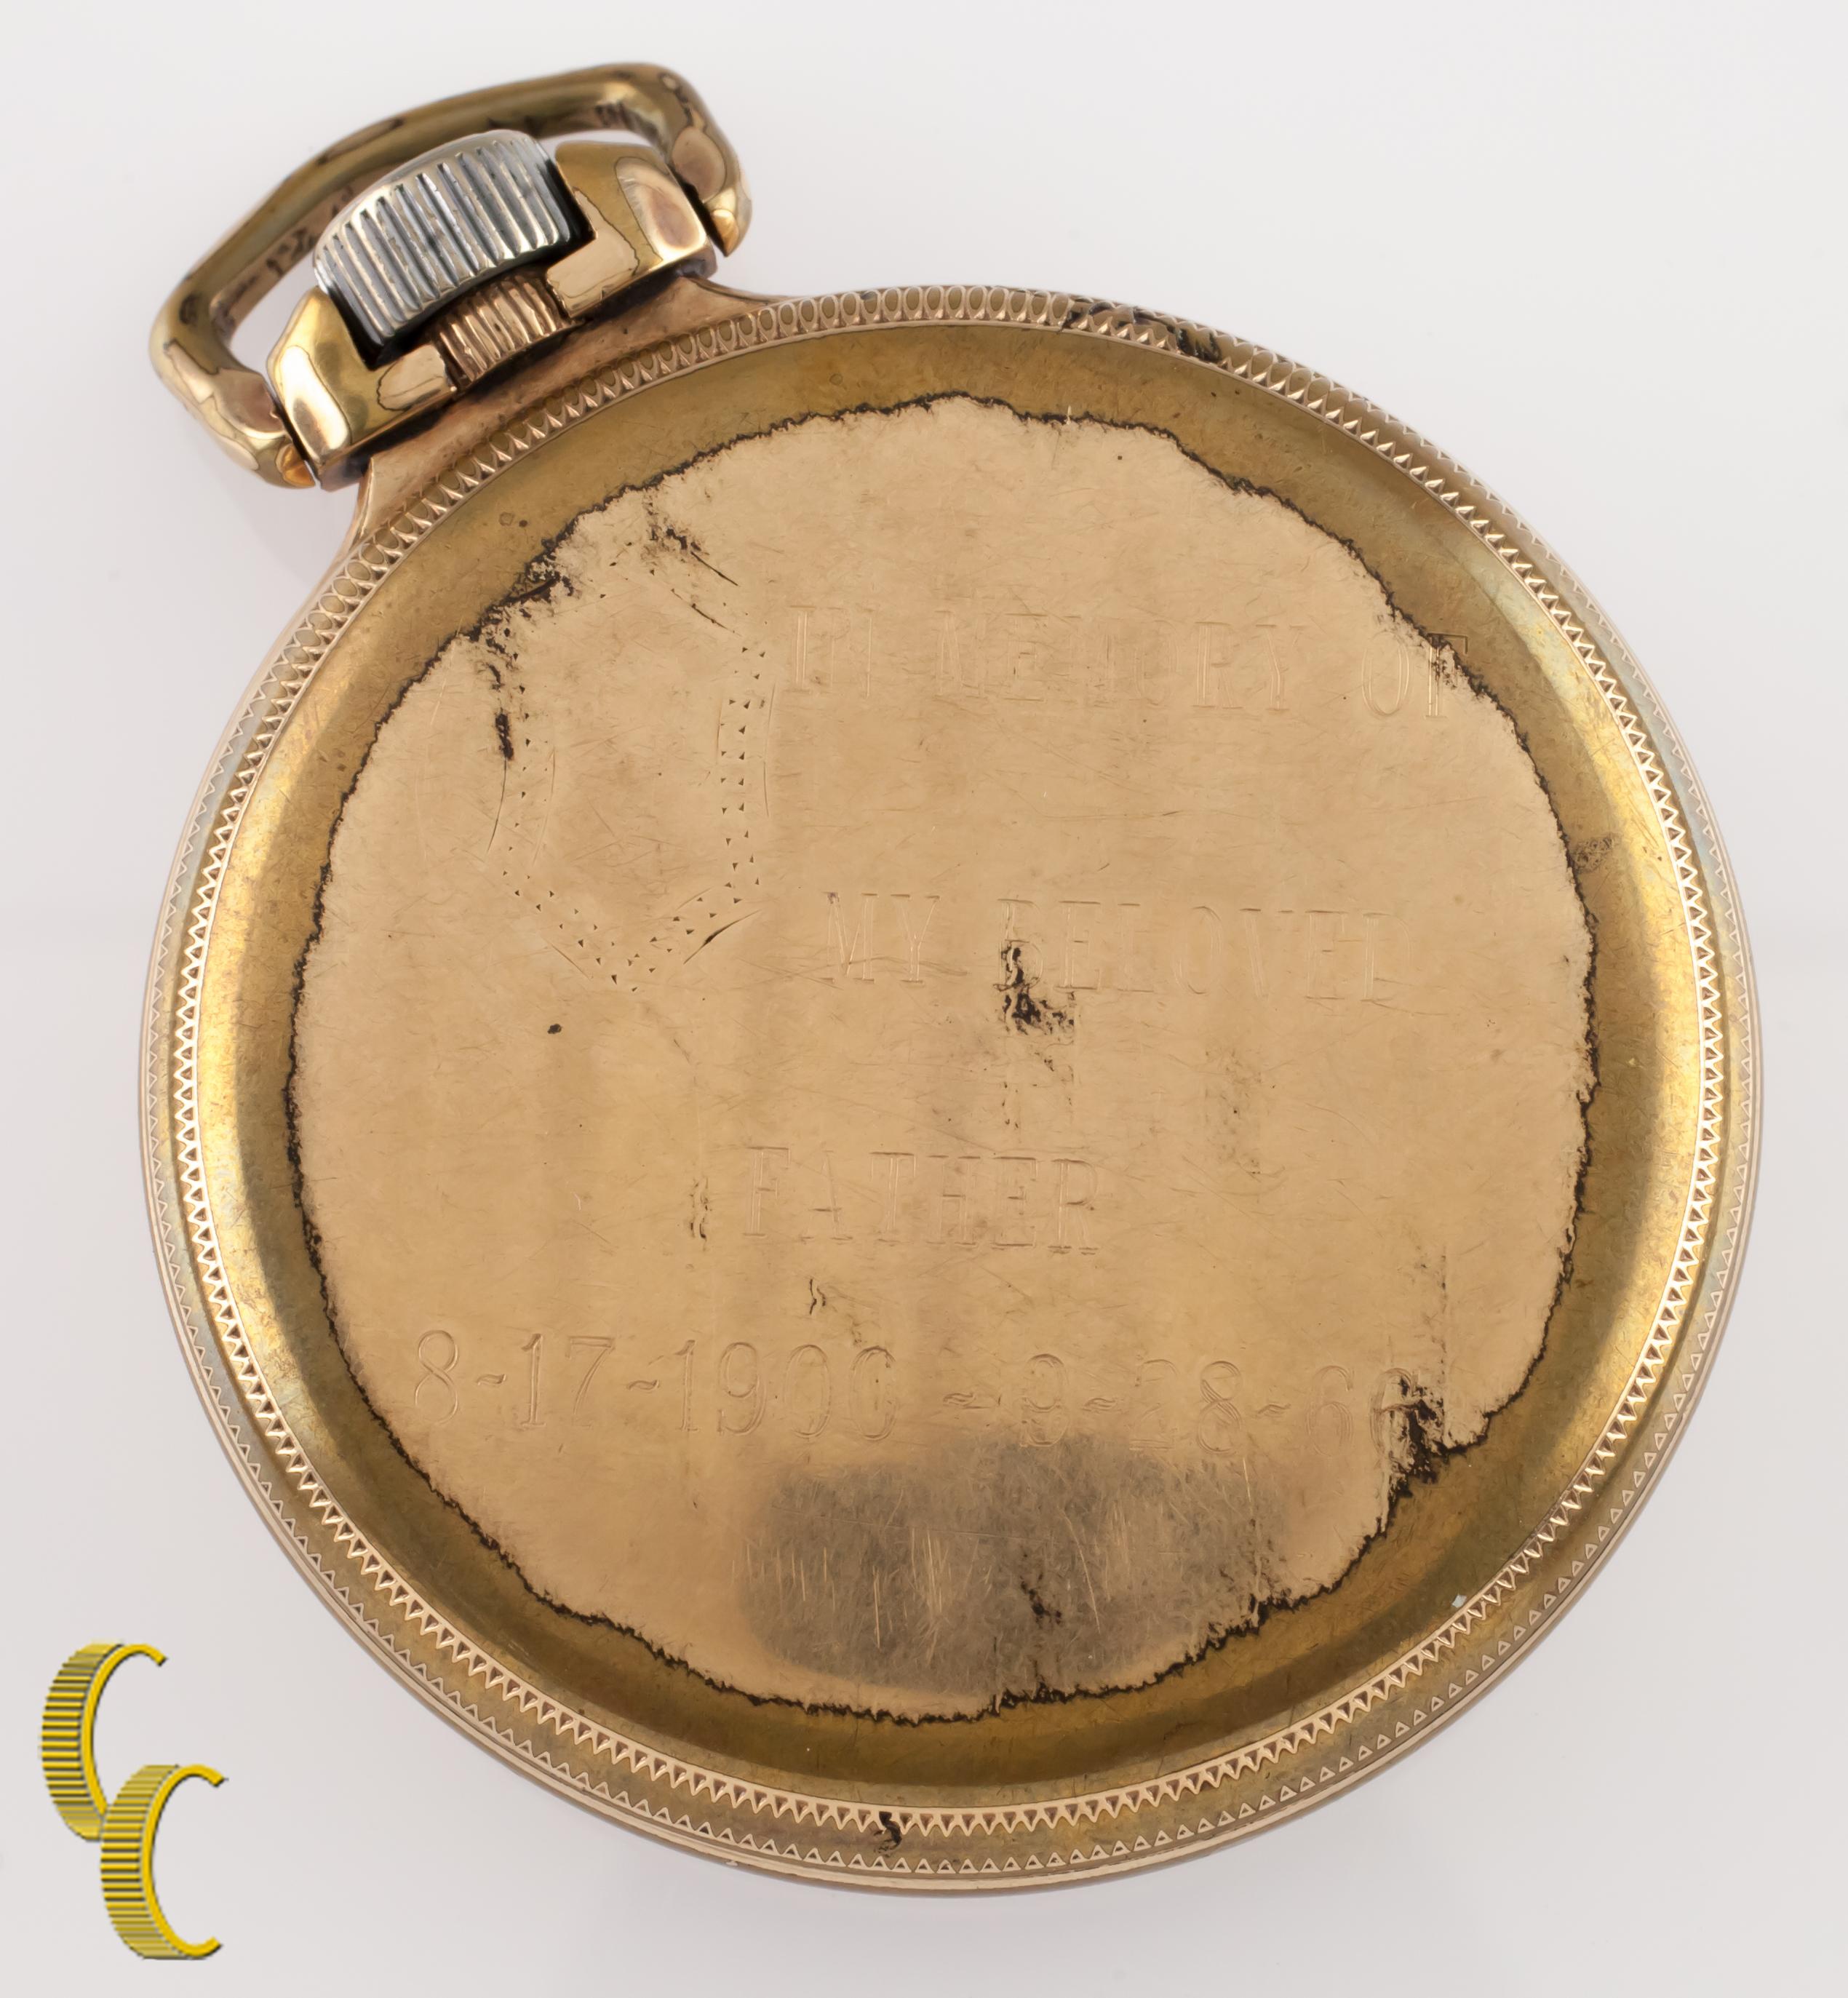 Beautiful Antique Hamilton Pocket Watch w/ White Dial Including Black Hands & Dedicated Second Dial
Yellow 10K Gold Filled Case w/ Personal engraving 